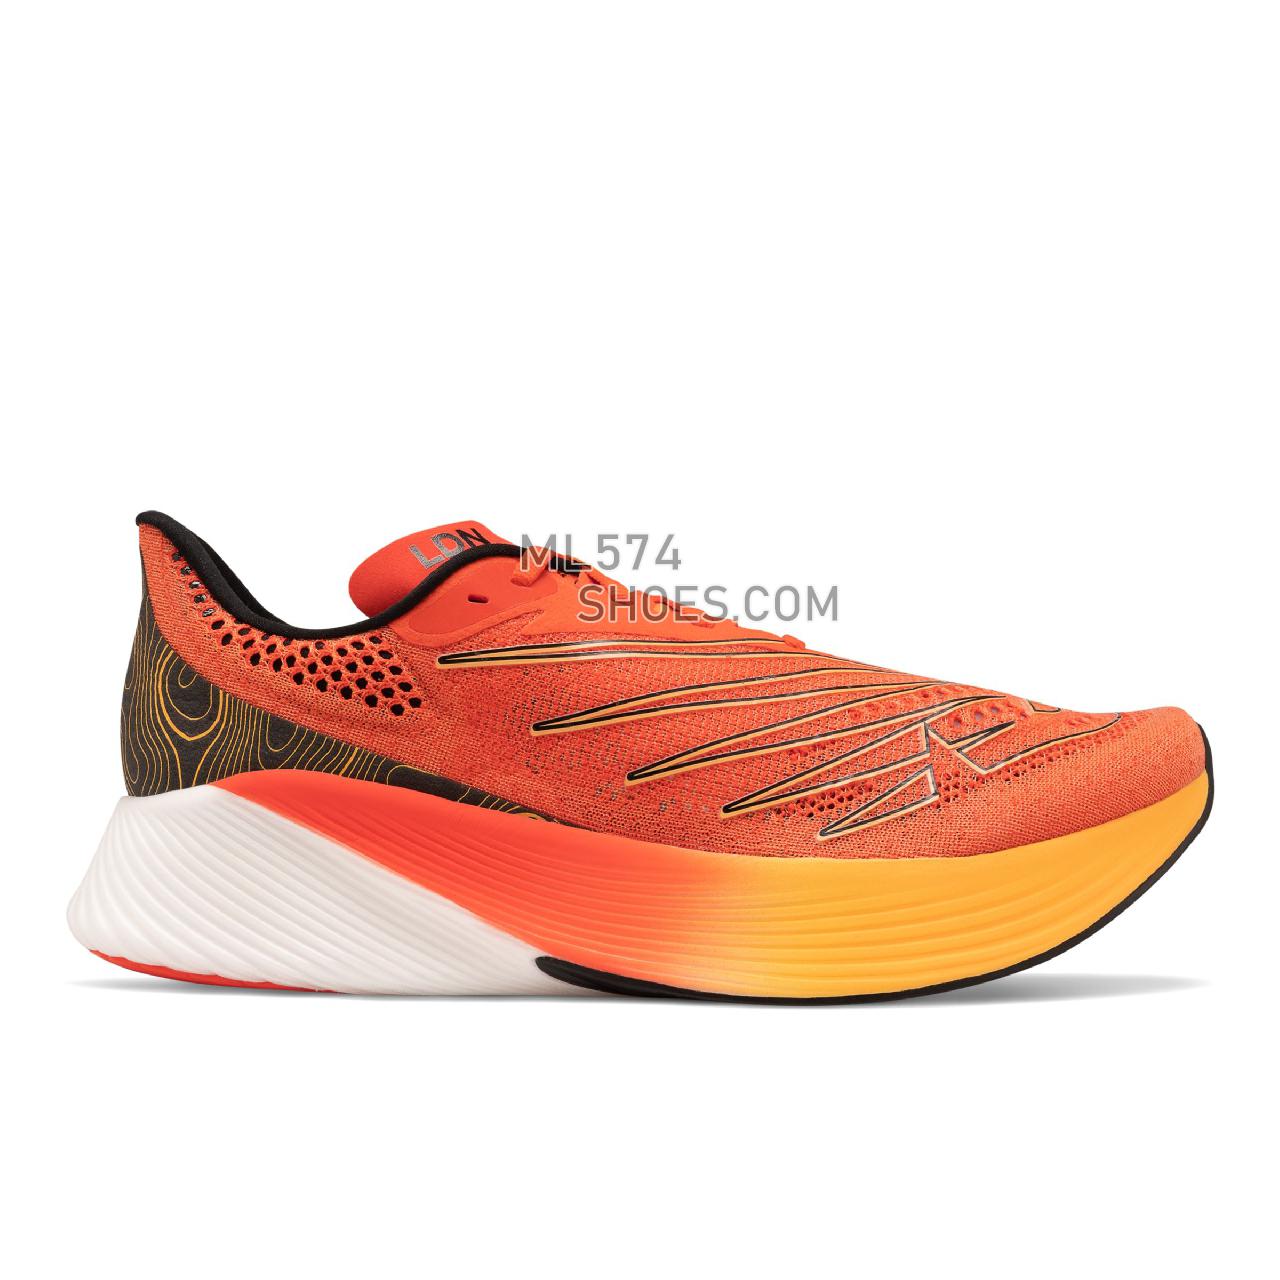 New Balance London Edition FuelCell RC Elite v2 - Men's Fuelcell Sleek And LightWeight - Ghost Pepper with Habanero - MRCELLN2